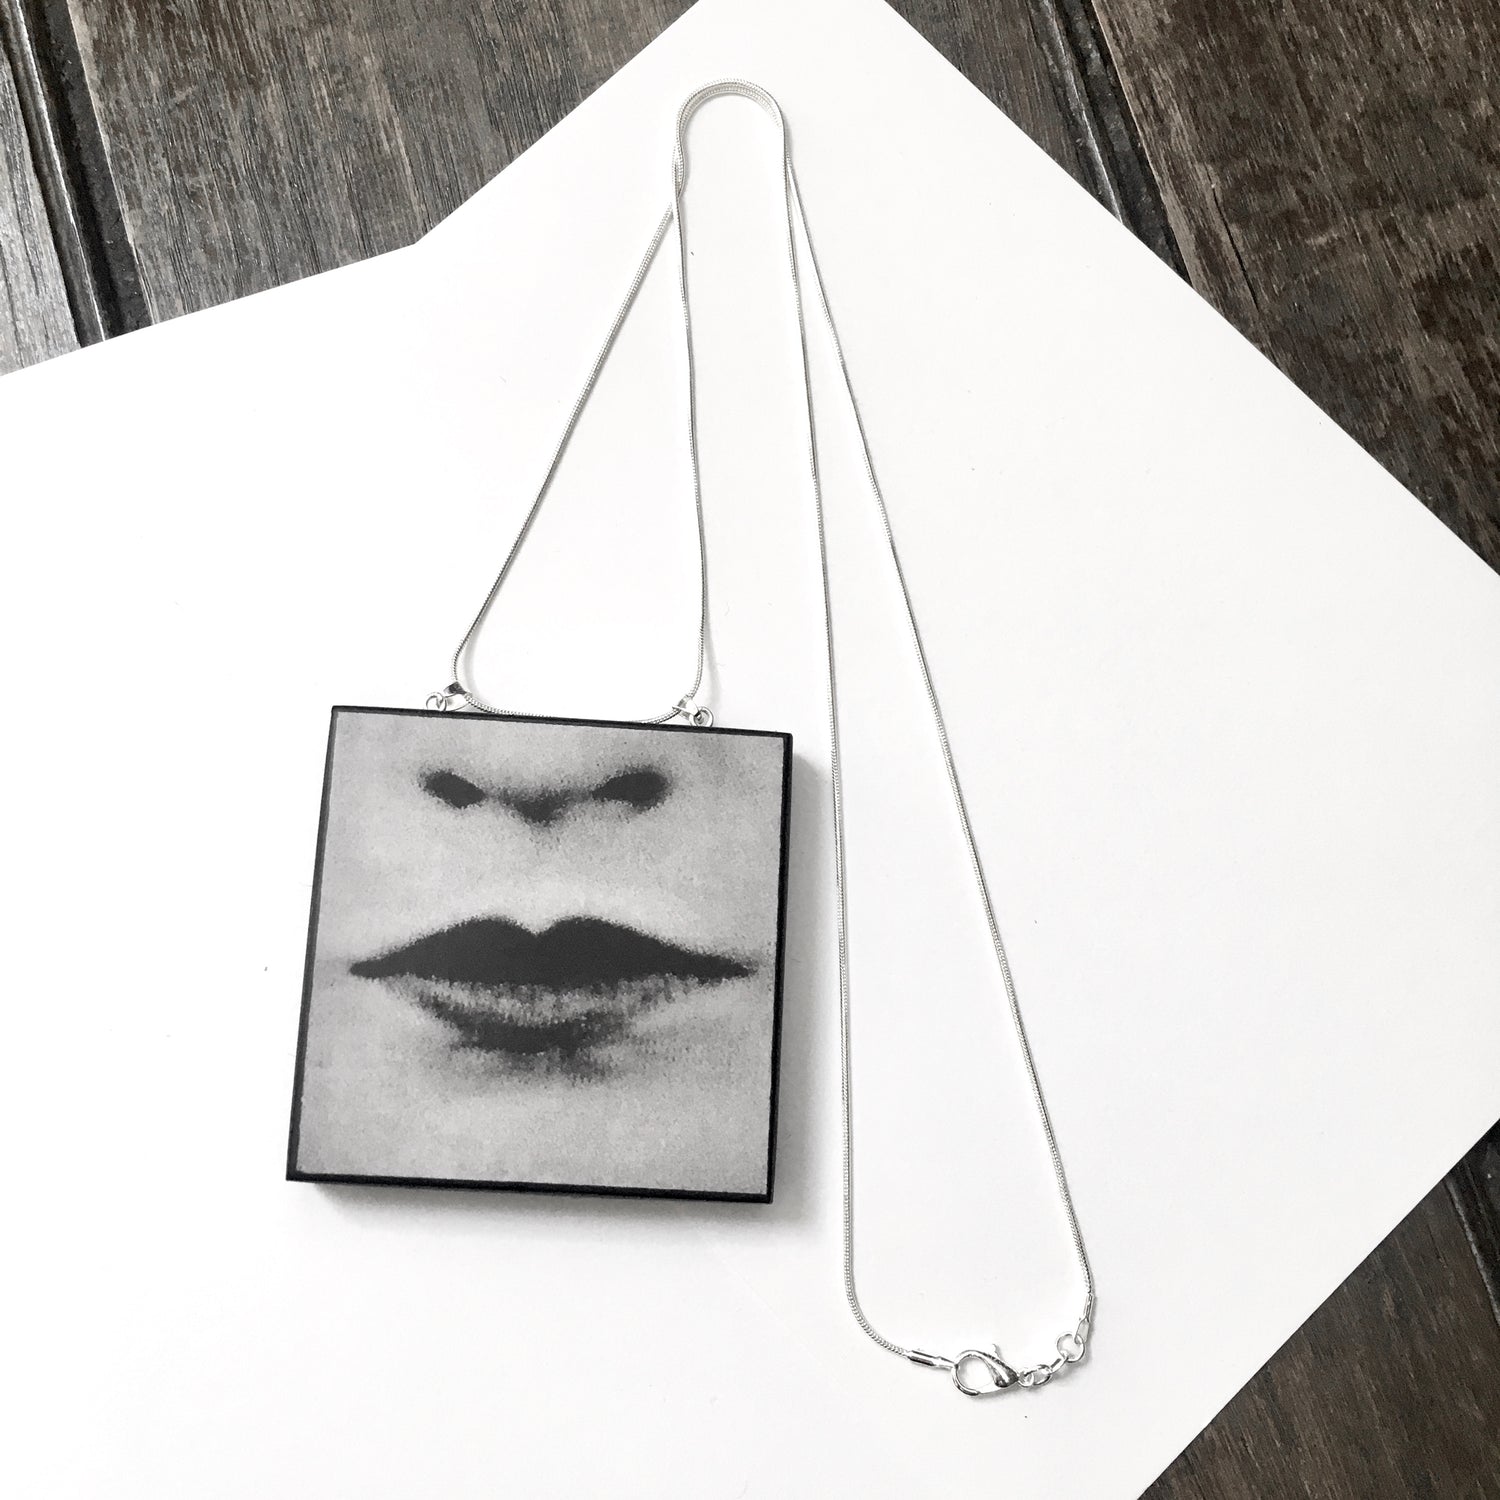 Pop art jewellery, lips black and white photo necklace. Handmade from sustainable wood  jewellery by Obljewellery